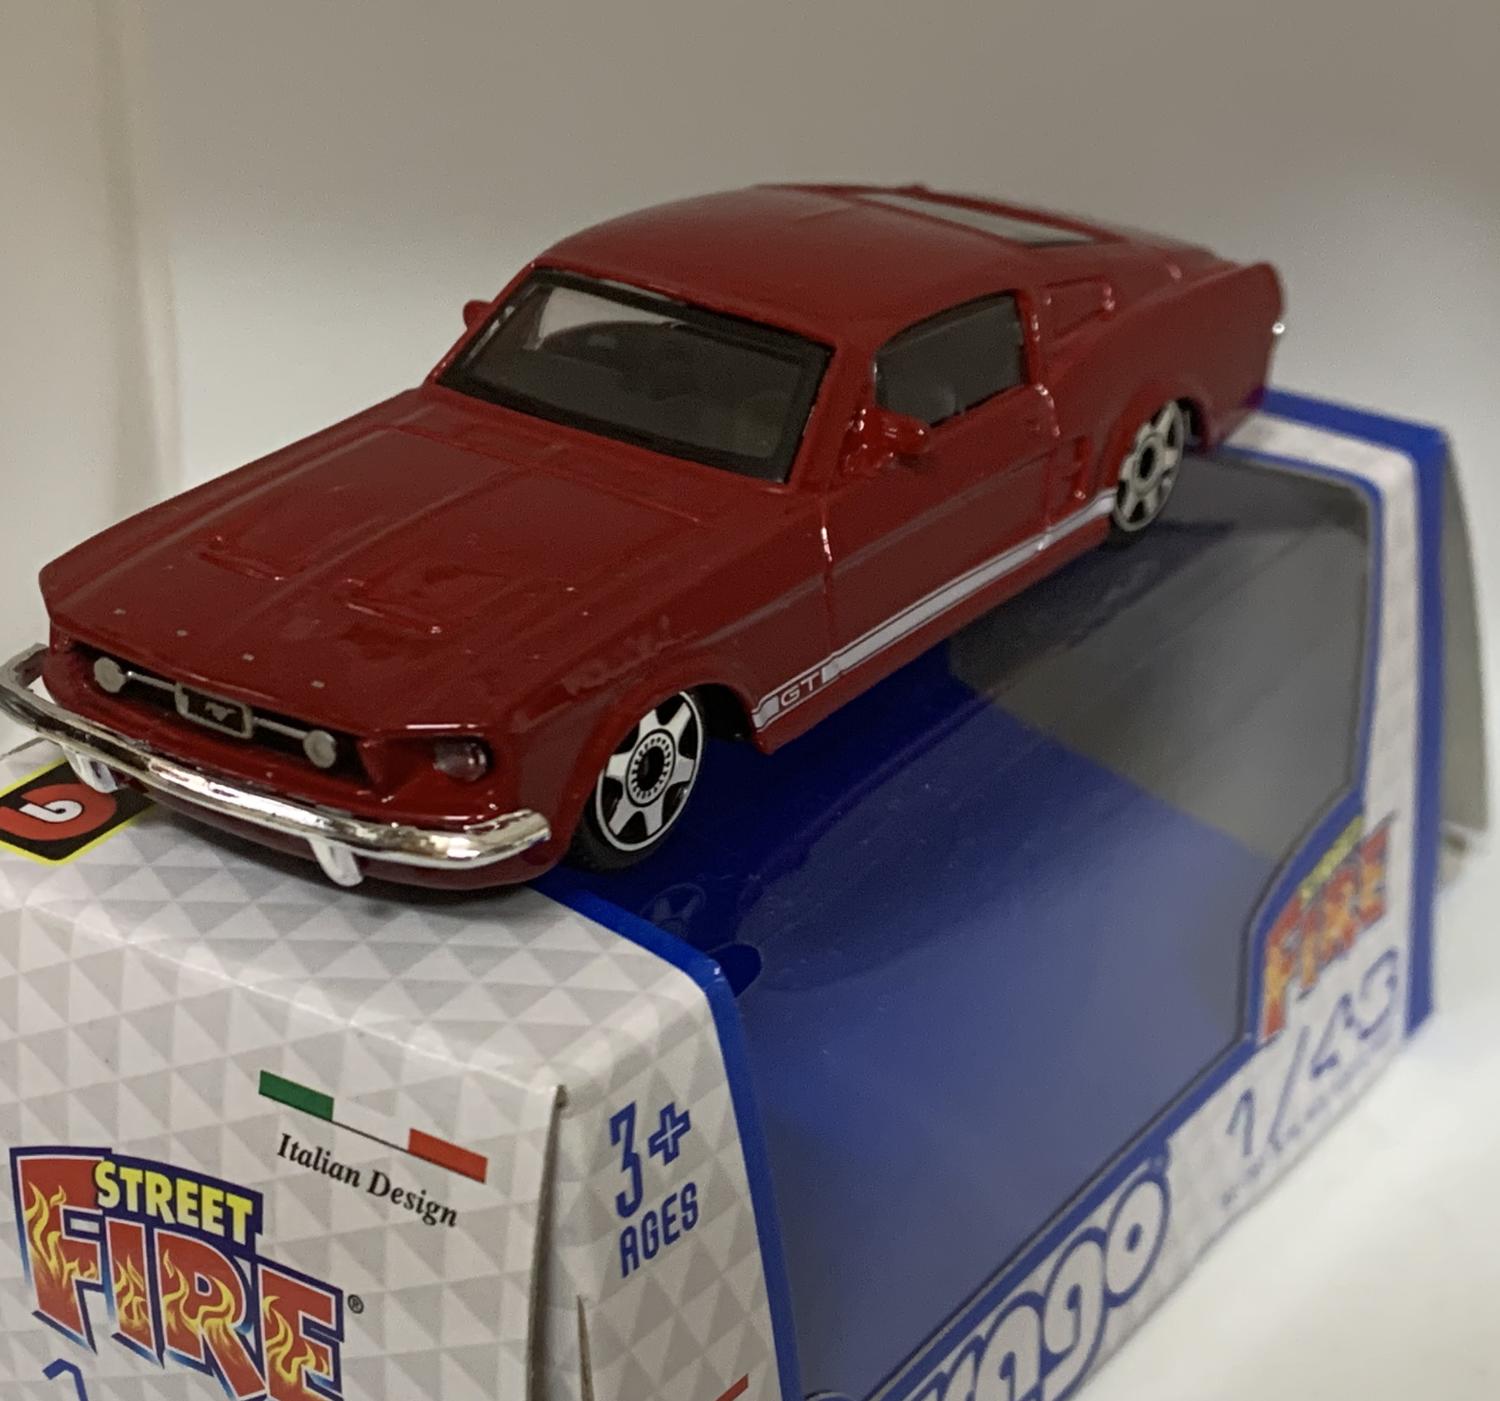 Ford Mustang GT 1964 in red 1:43 scale model from Bburago, streetfire